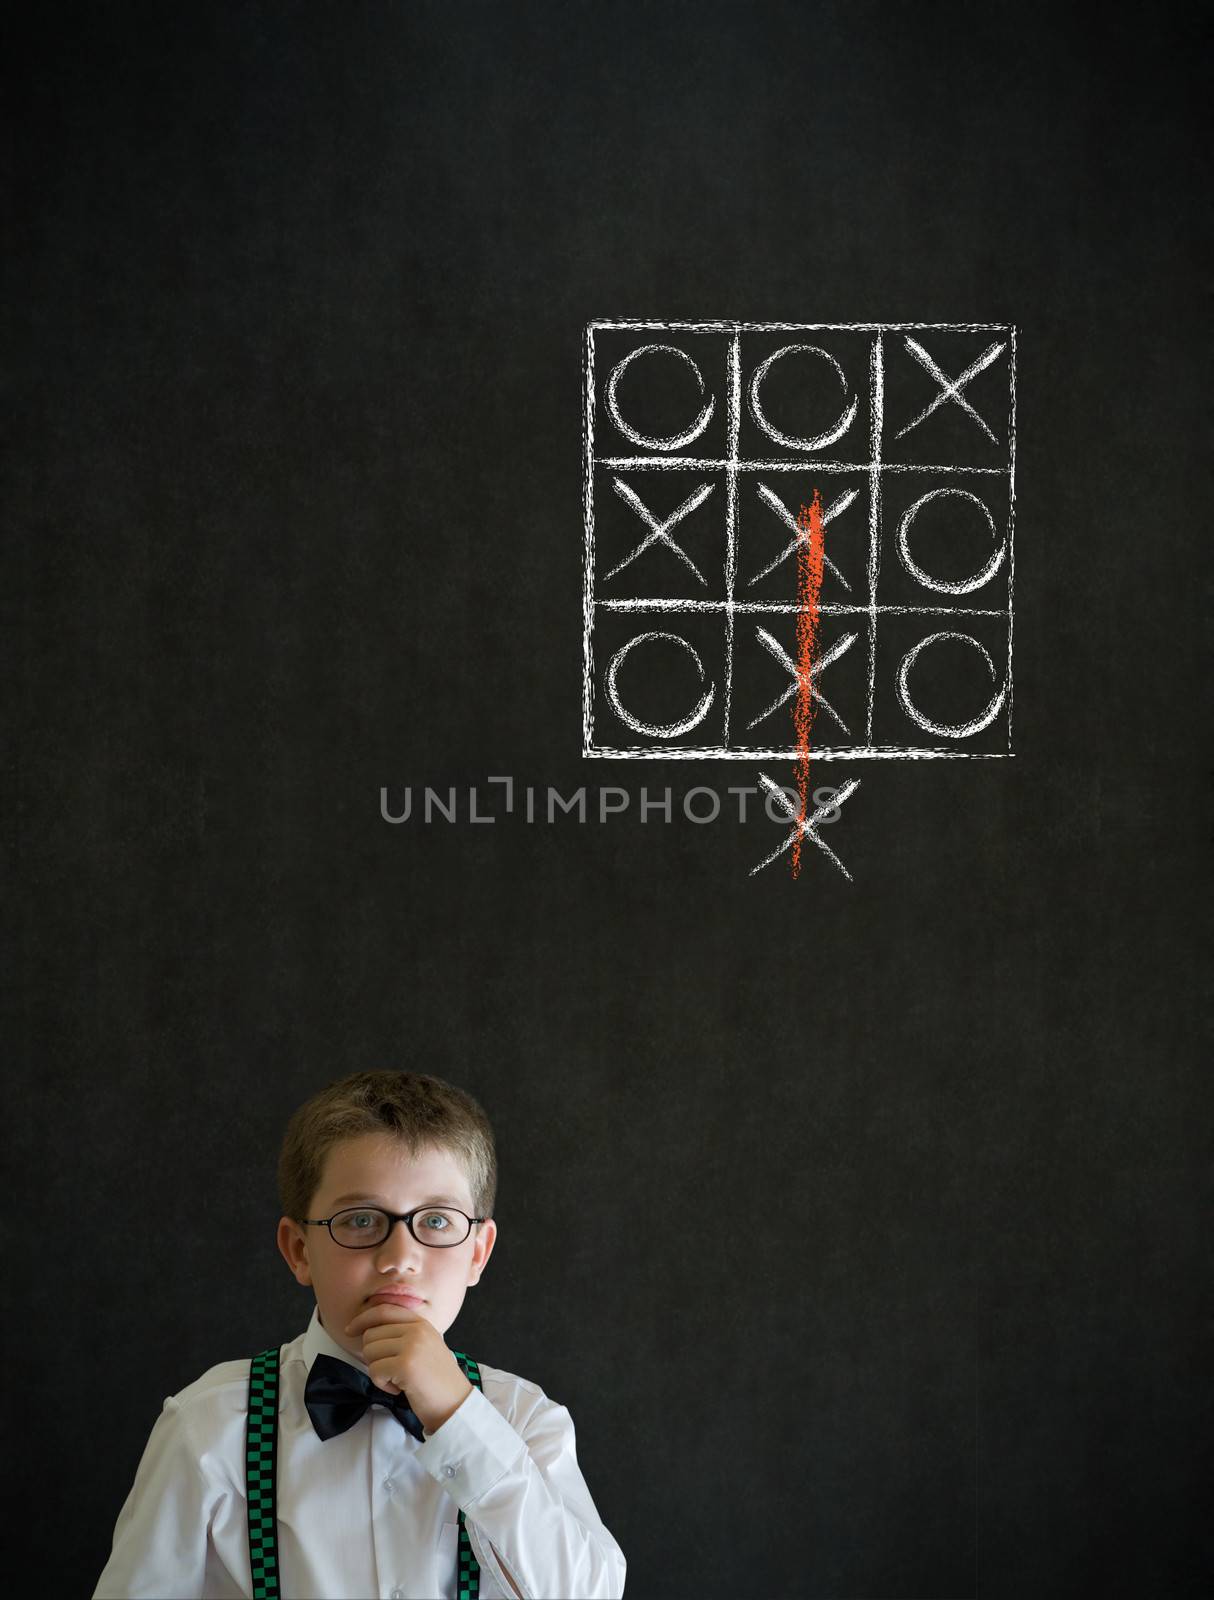 Thinking boy dressed up as business man with thinking out of the box tic tac toe concept on blackboard background